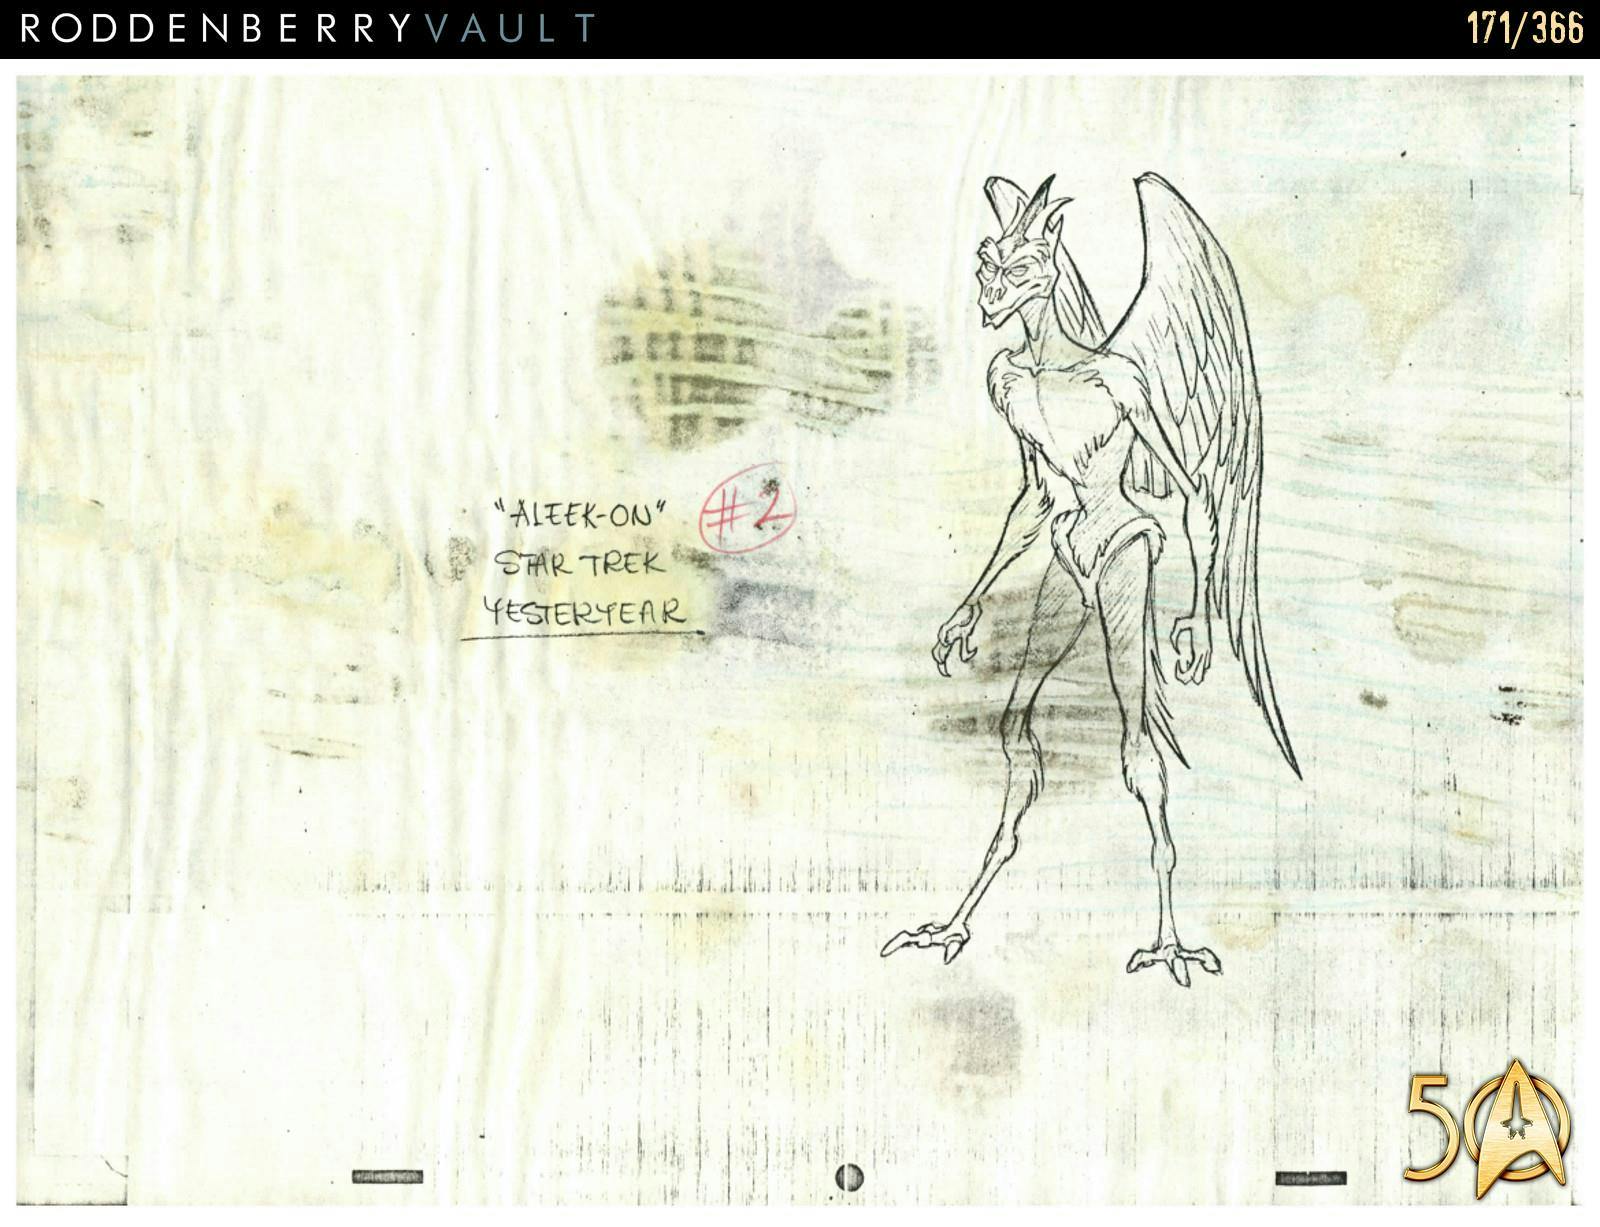 From the Roddenberry 366 Vault - The Animated Series - Aleek-Om concept art for 'Yesteryear'